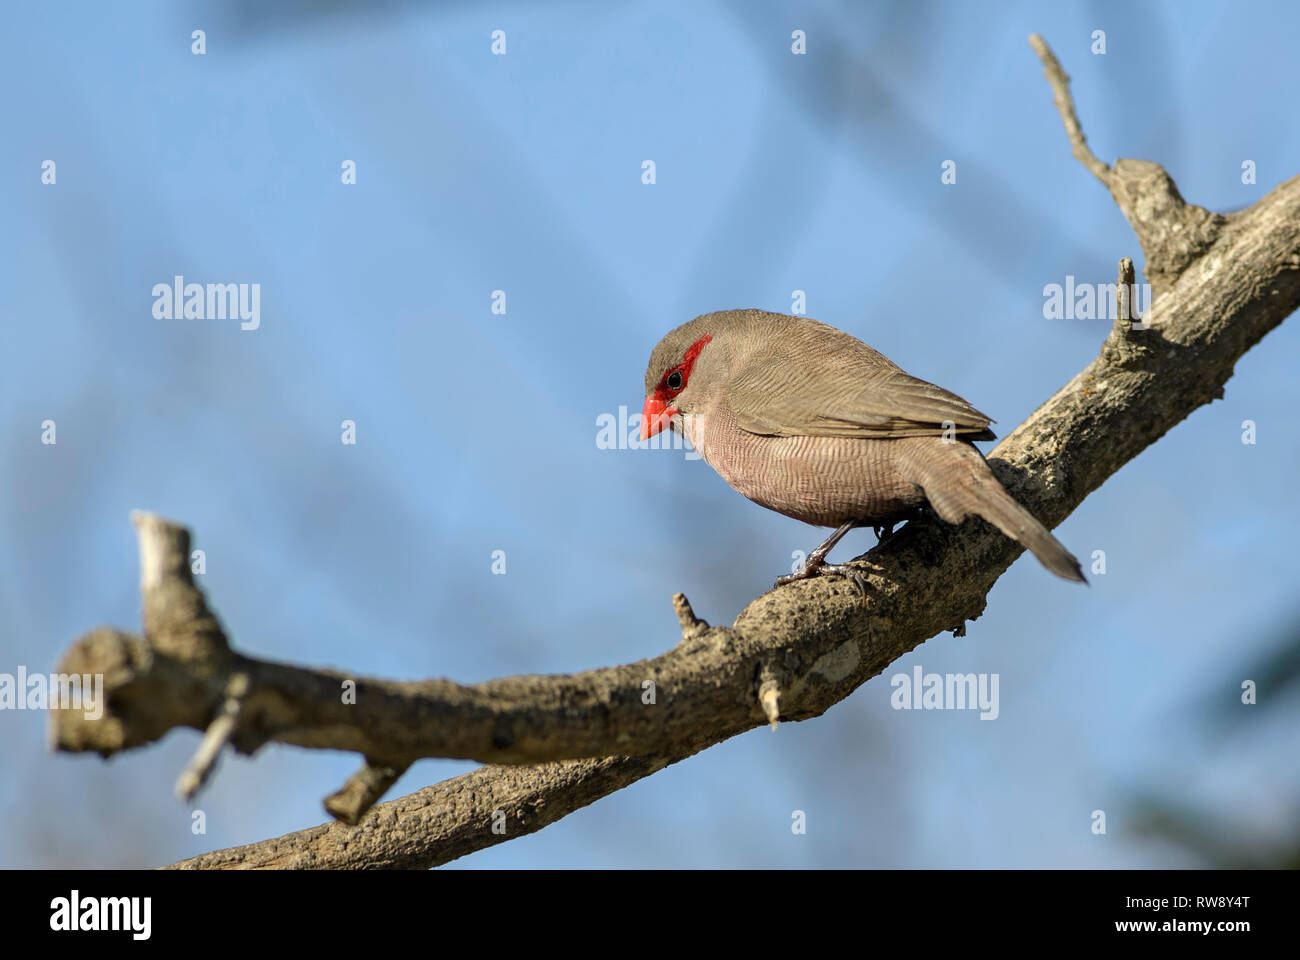 Common Waxbill - Estrilda astrild, beautiful small perching bird with red beak from African gardens and bushes, Swakopmund, Namibia. Stock Photo